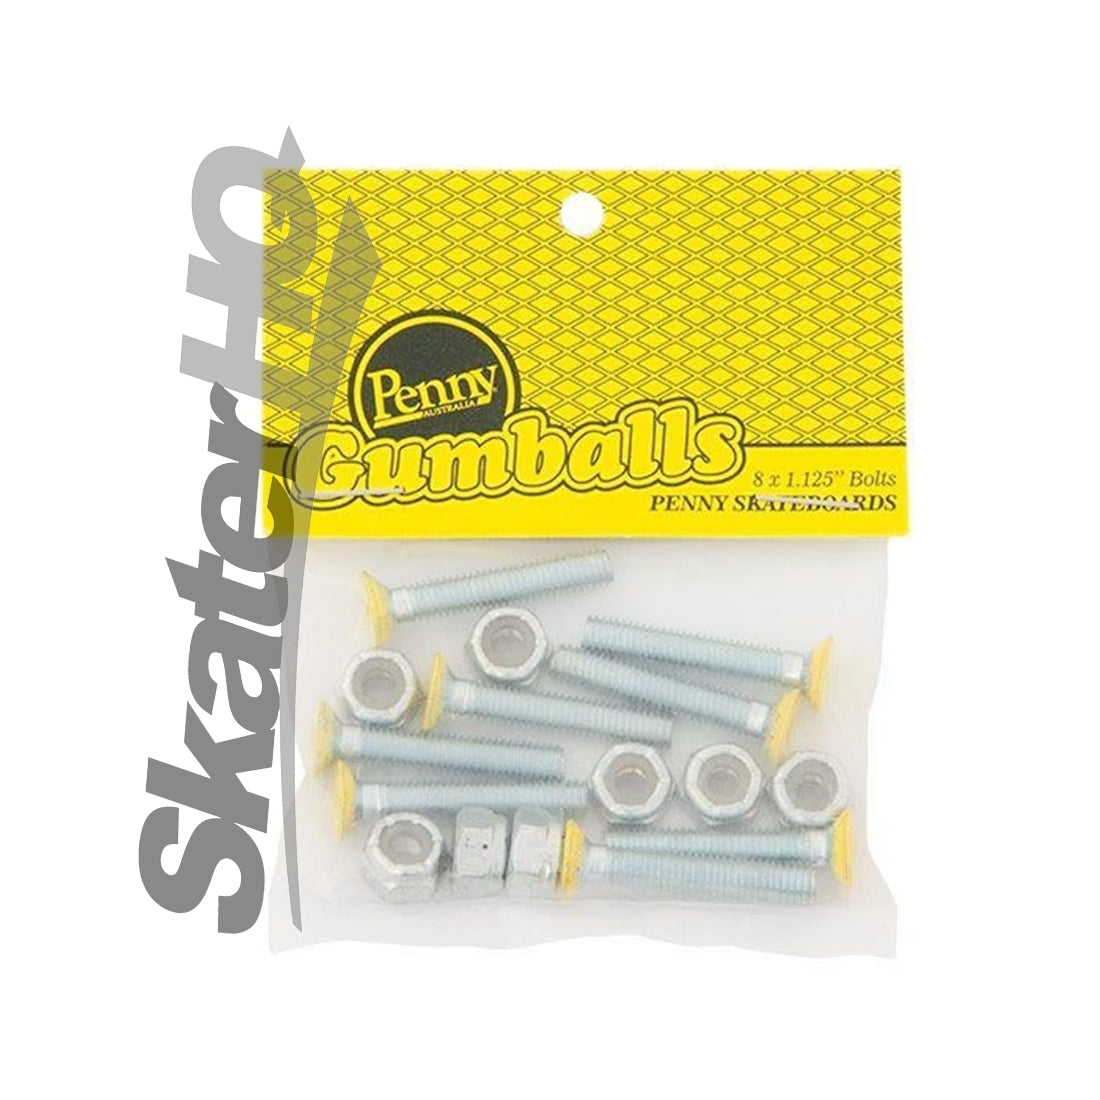 Penny Gumball 1.125 Bolts - Yellow Skateboard Hardware and Parts